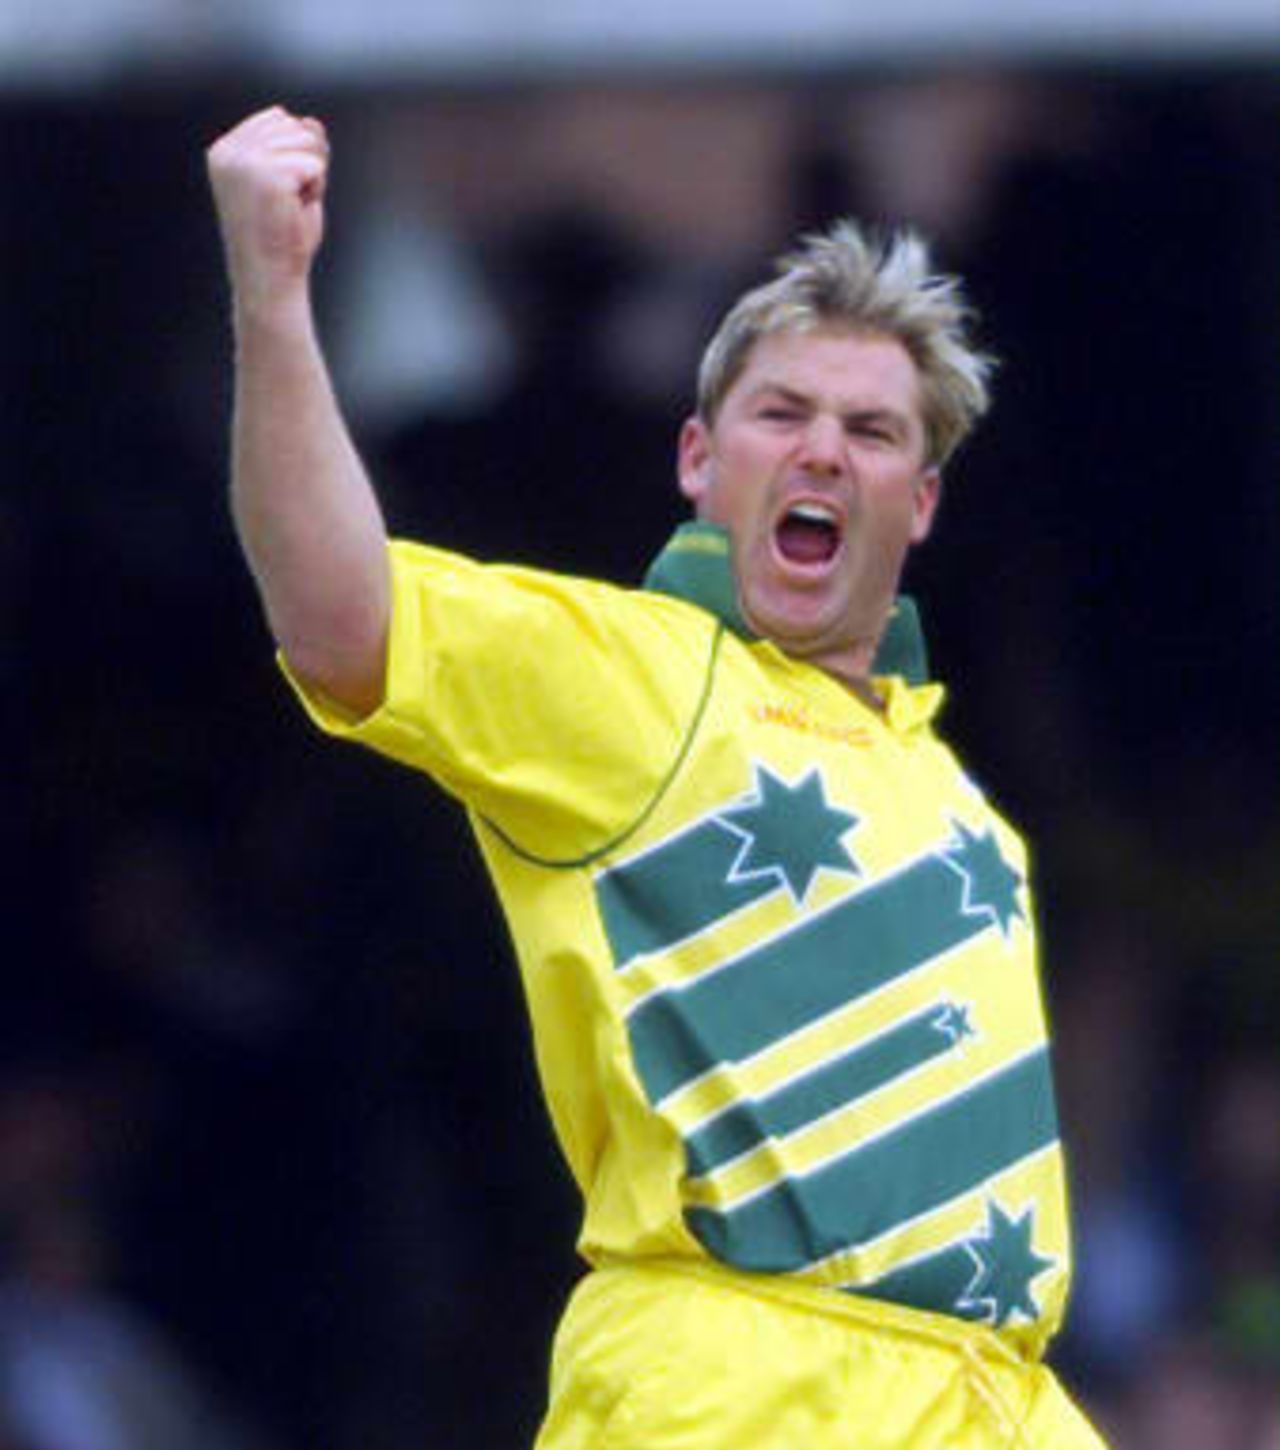 Shane Warne reacts after taking his third wicket that of Pakistan's Shahid Afridi 20 June 1999 during the Cricket World Cup final at Lords